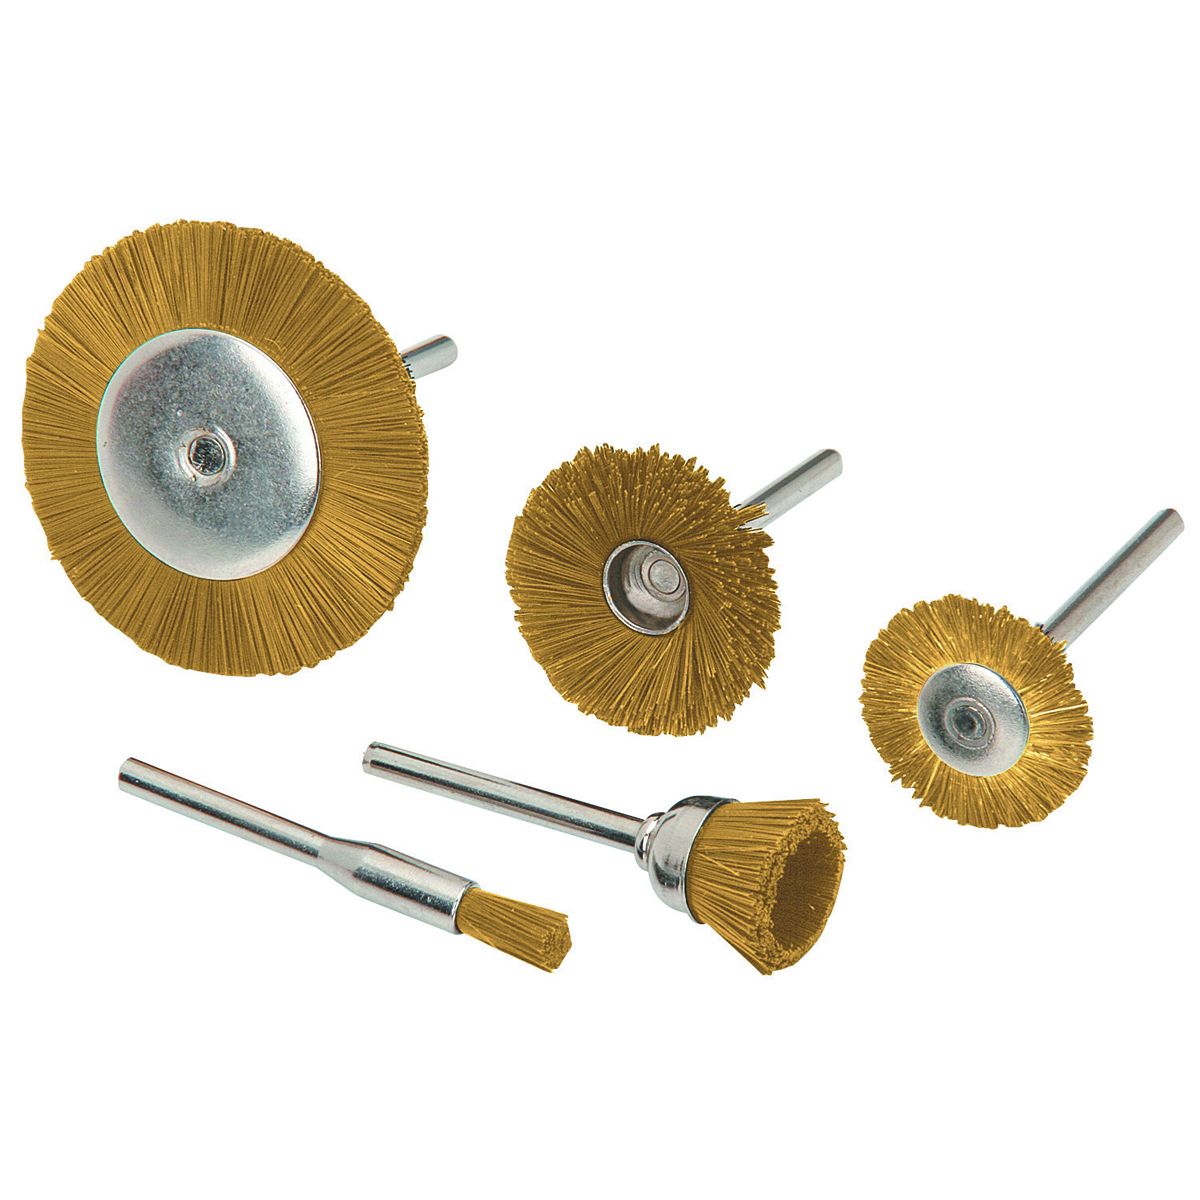 CHICAGO ELECTRIC POWER TOOLS 5 Piece Brass Wheel and Brush Set